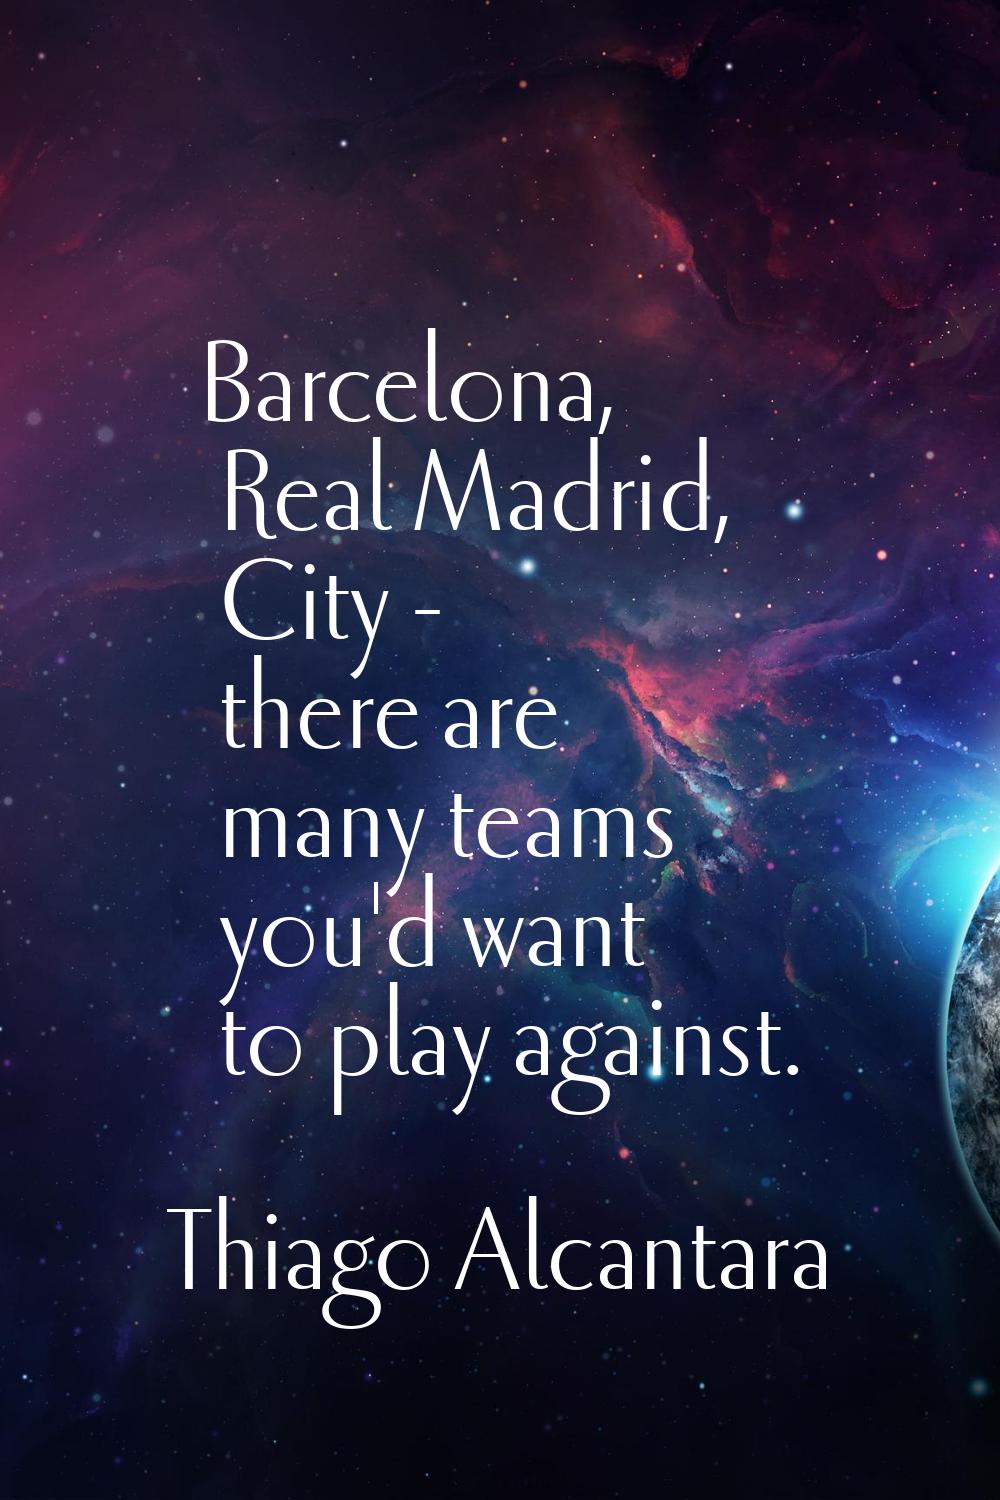 Barcelona, Real Madrid, City - there are many teams you'd want to play against.